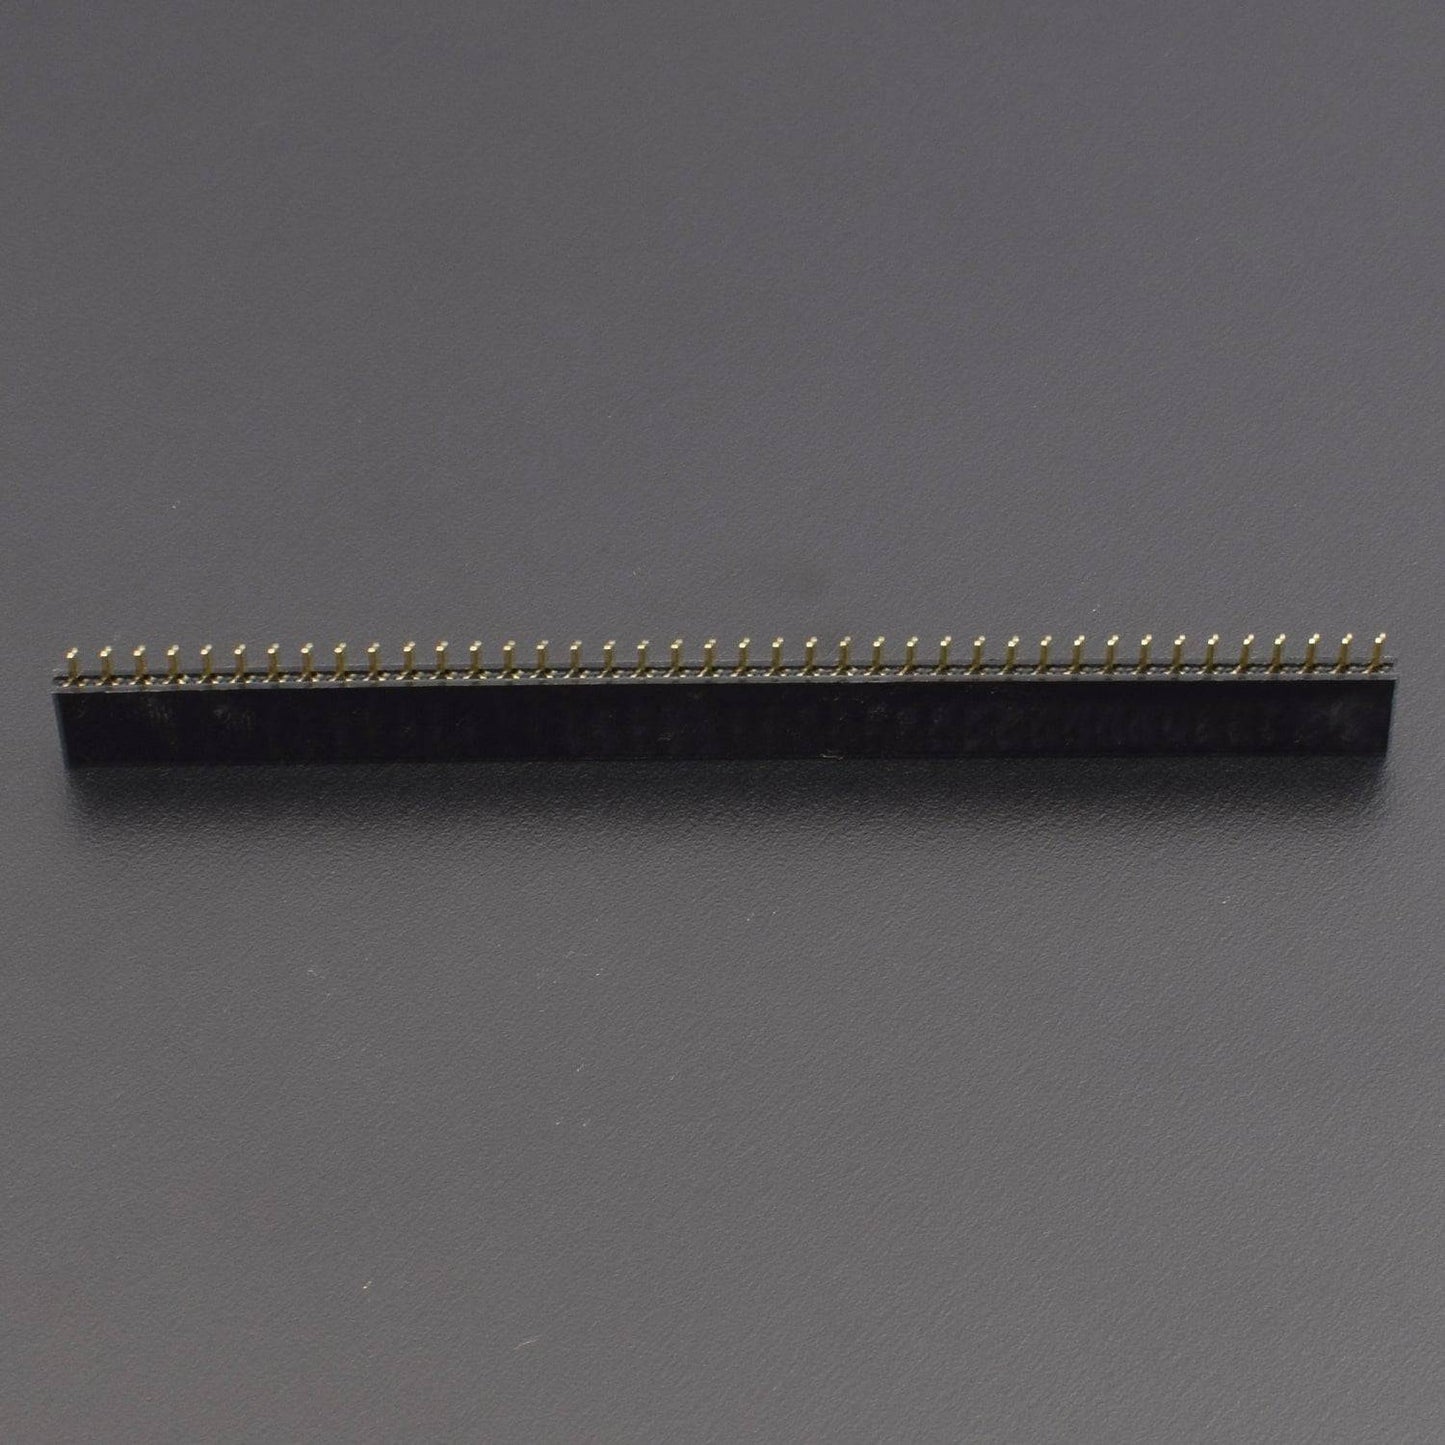 1*40 Single Row Female Pin Header Connector Strip(2.54mm Pitch) - RK020 - REES52